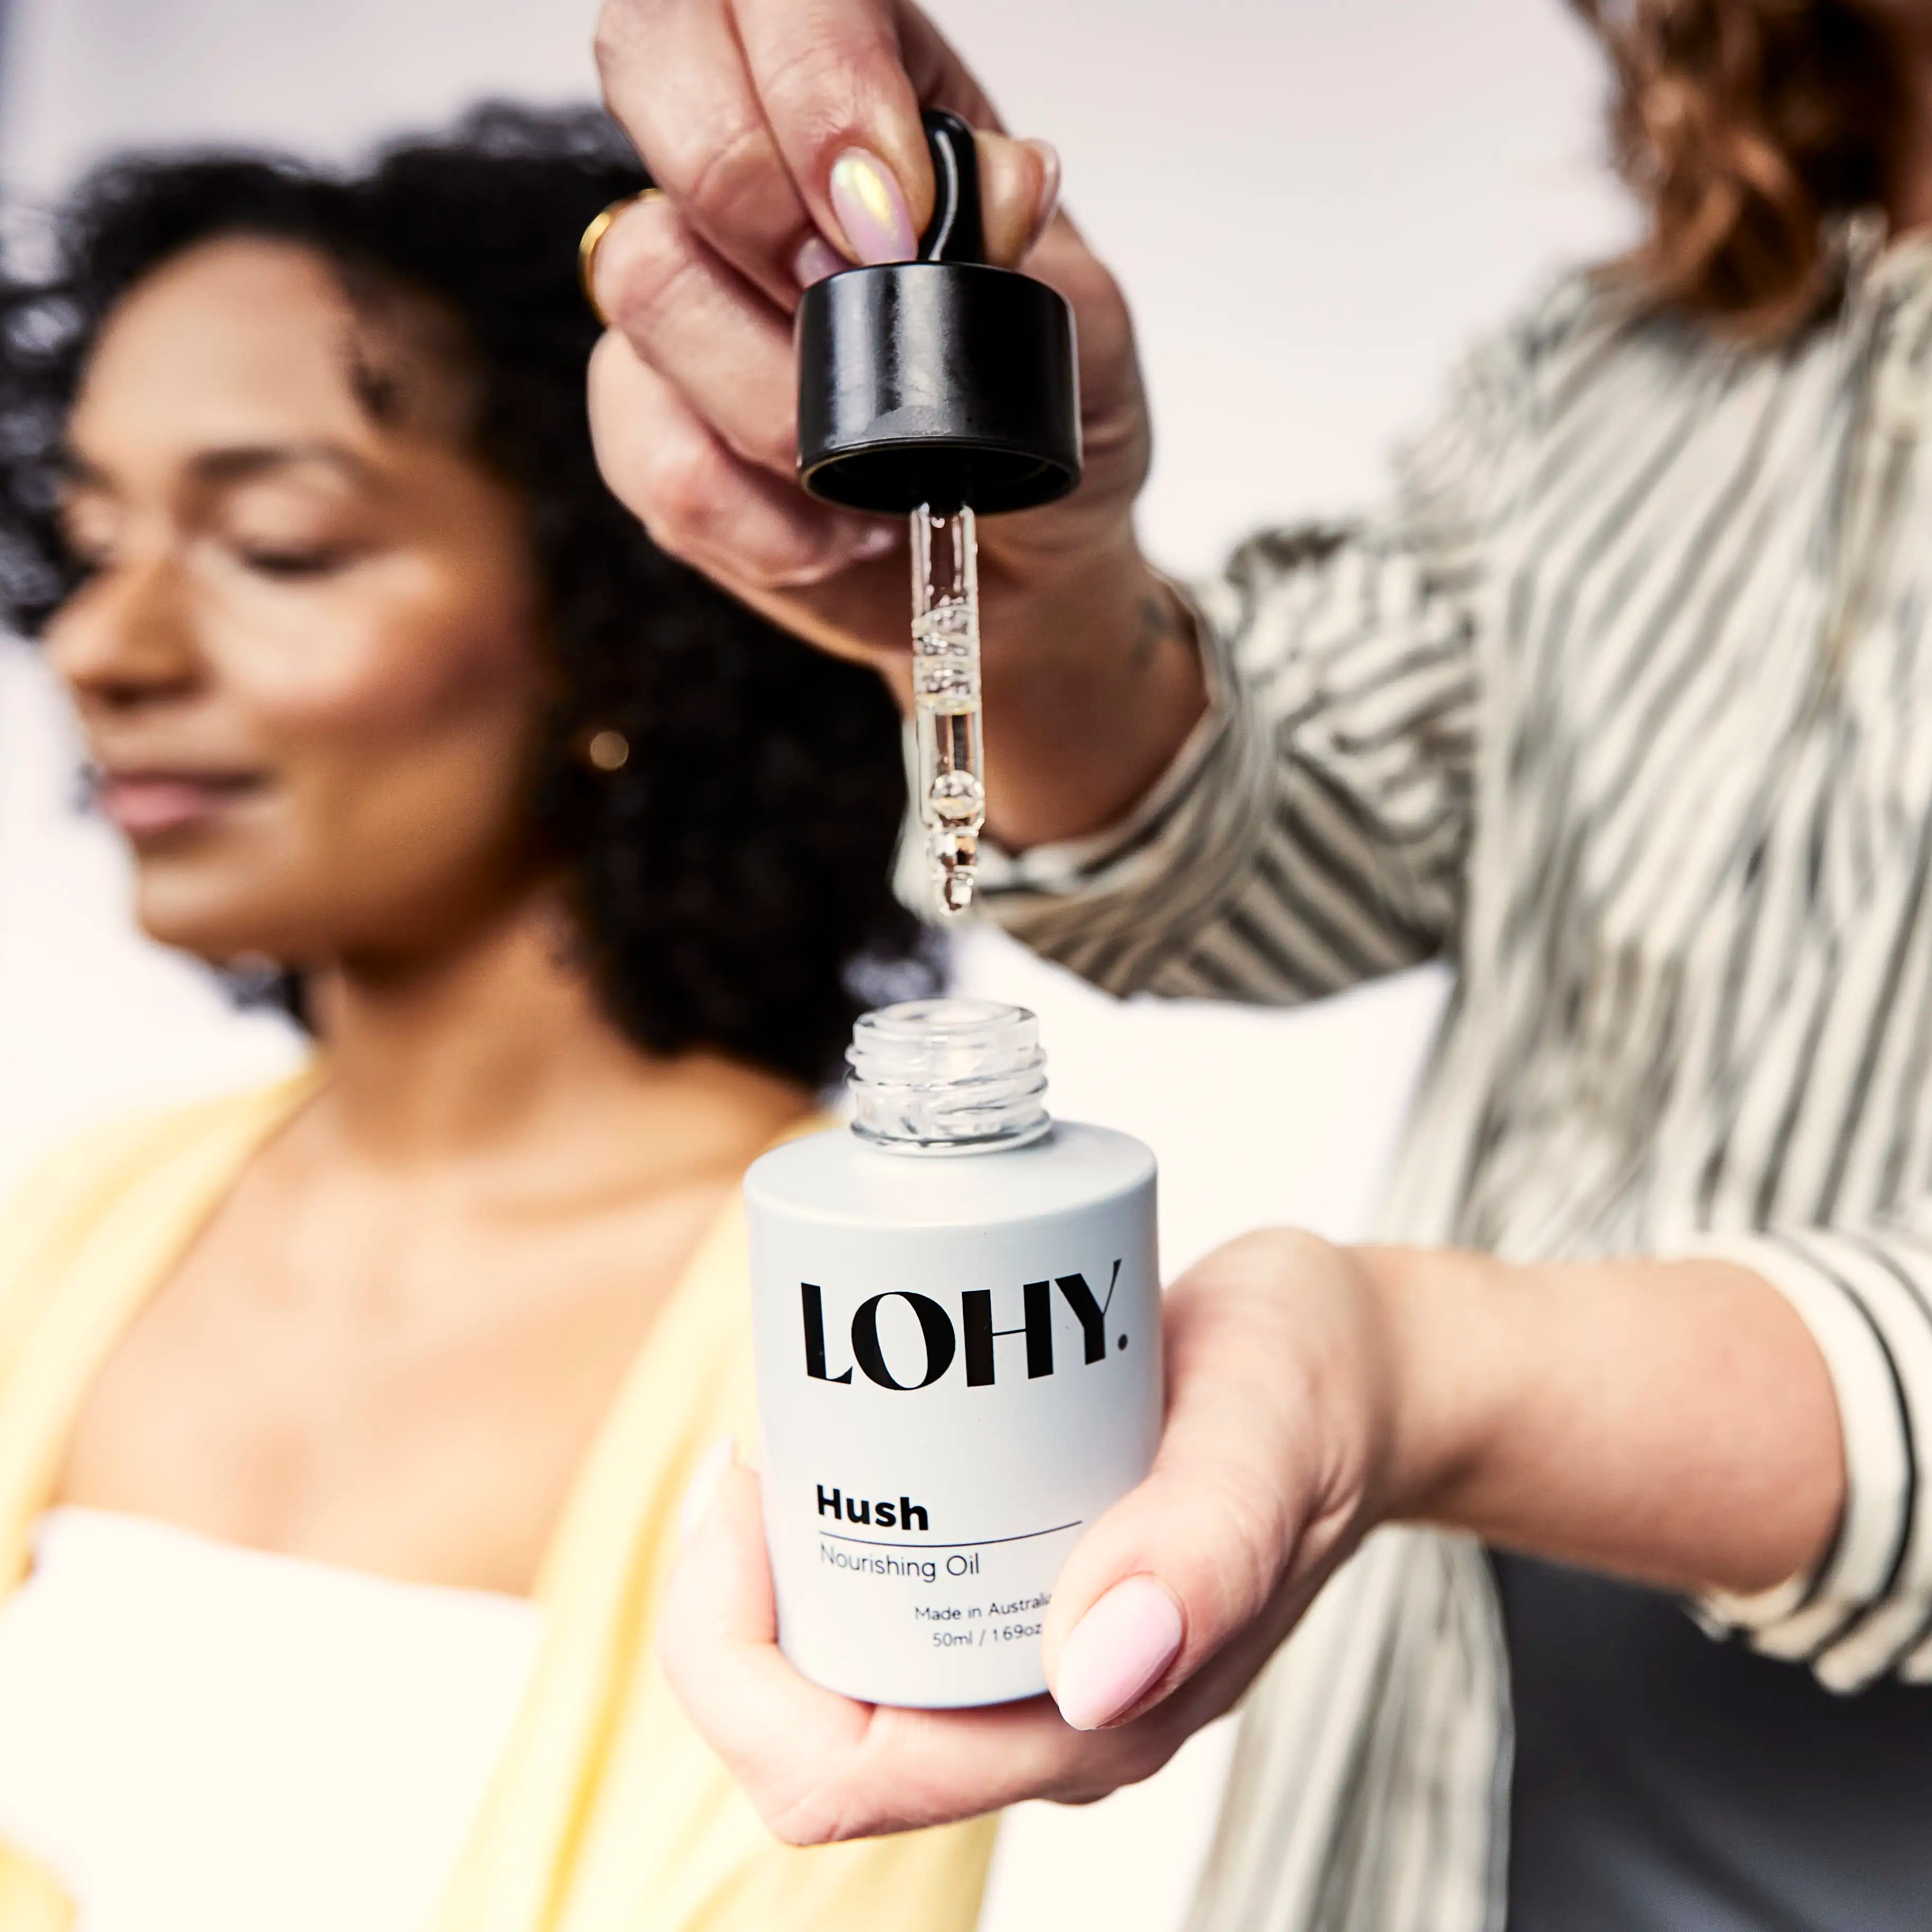 Woman pumping a few drops of LOHY Hush Nourishing Oil out of the bottle